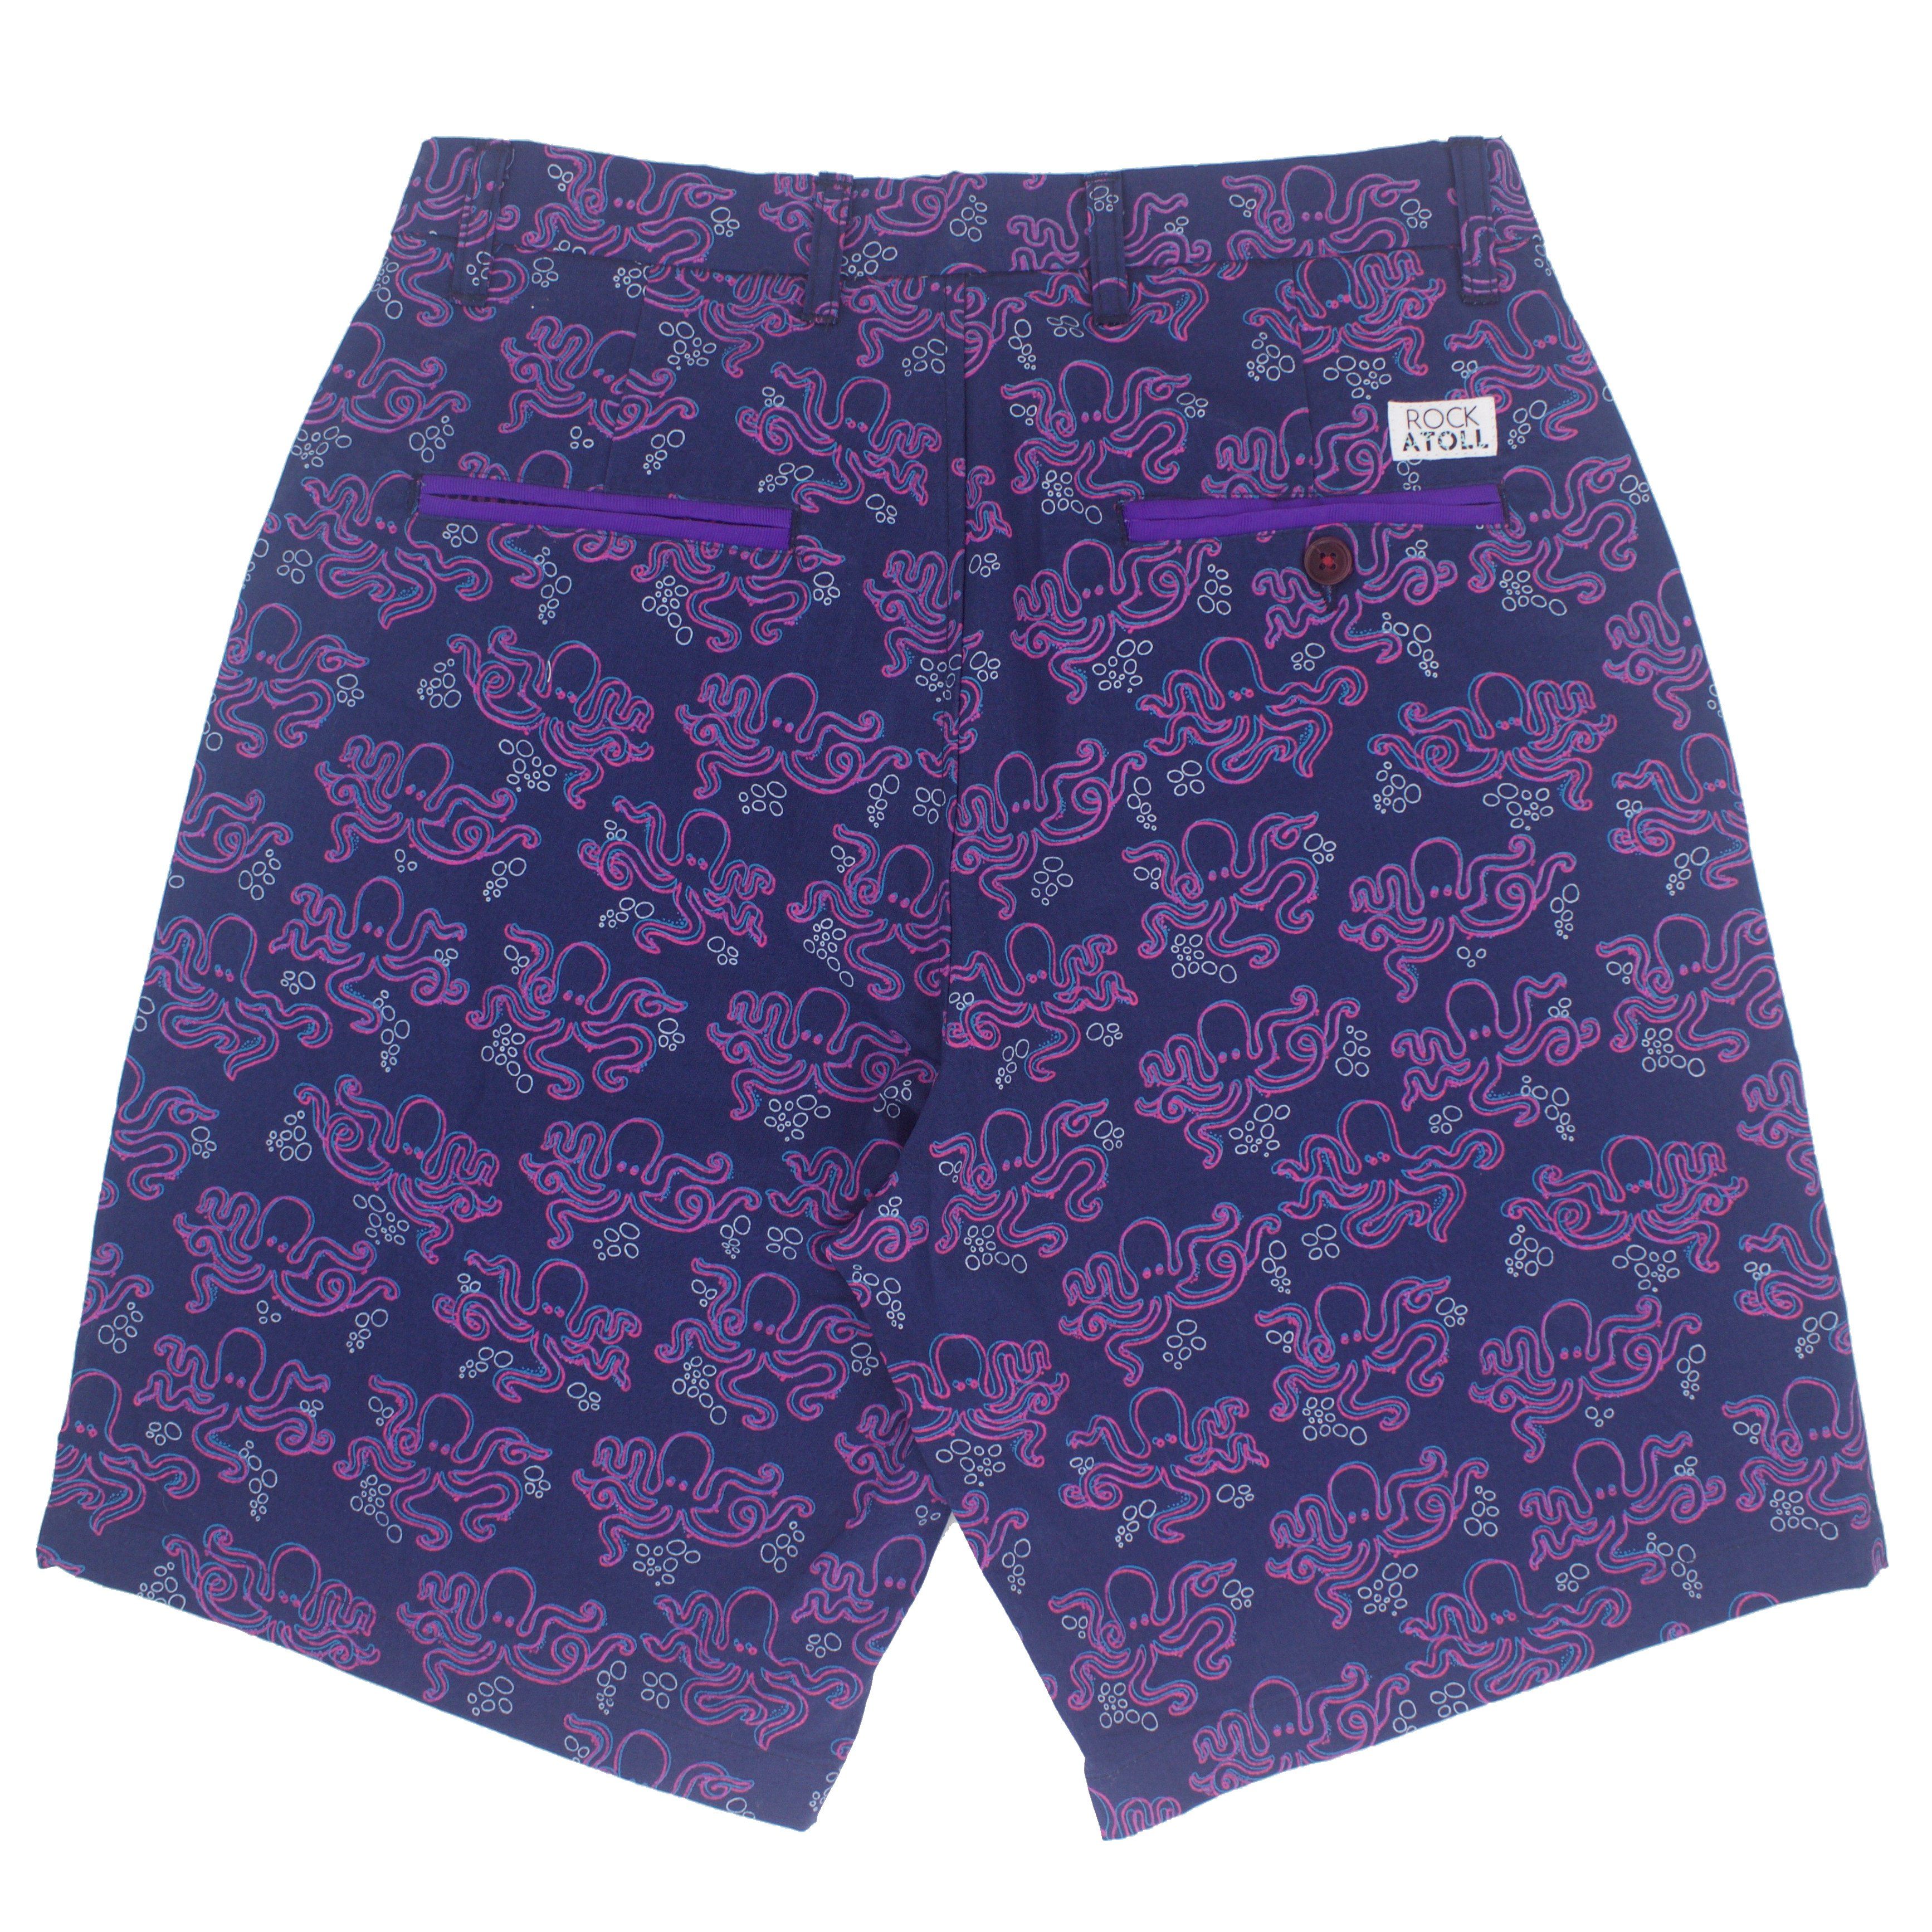 Octopus All Over Print Flat Front Shorts for Men in Purple Blue